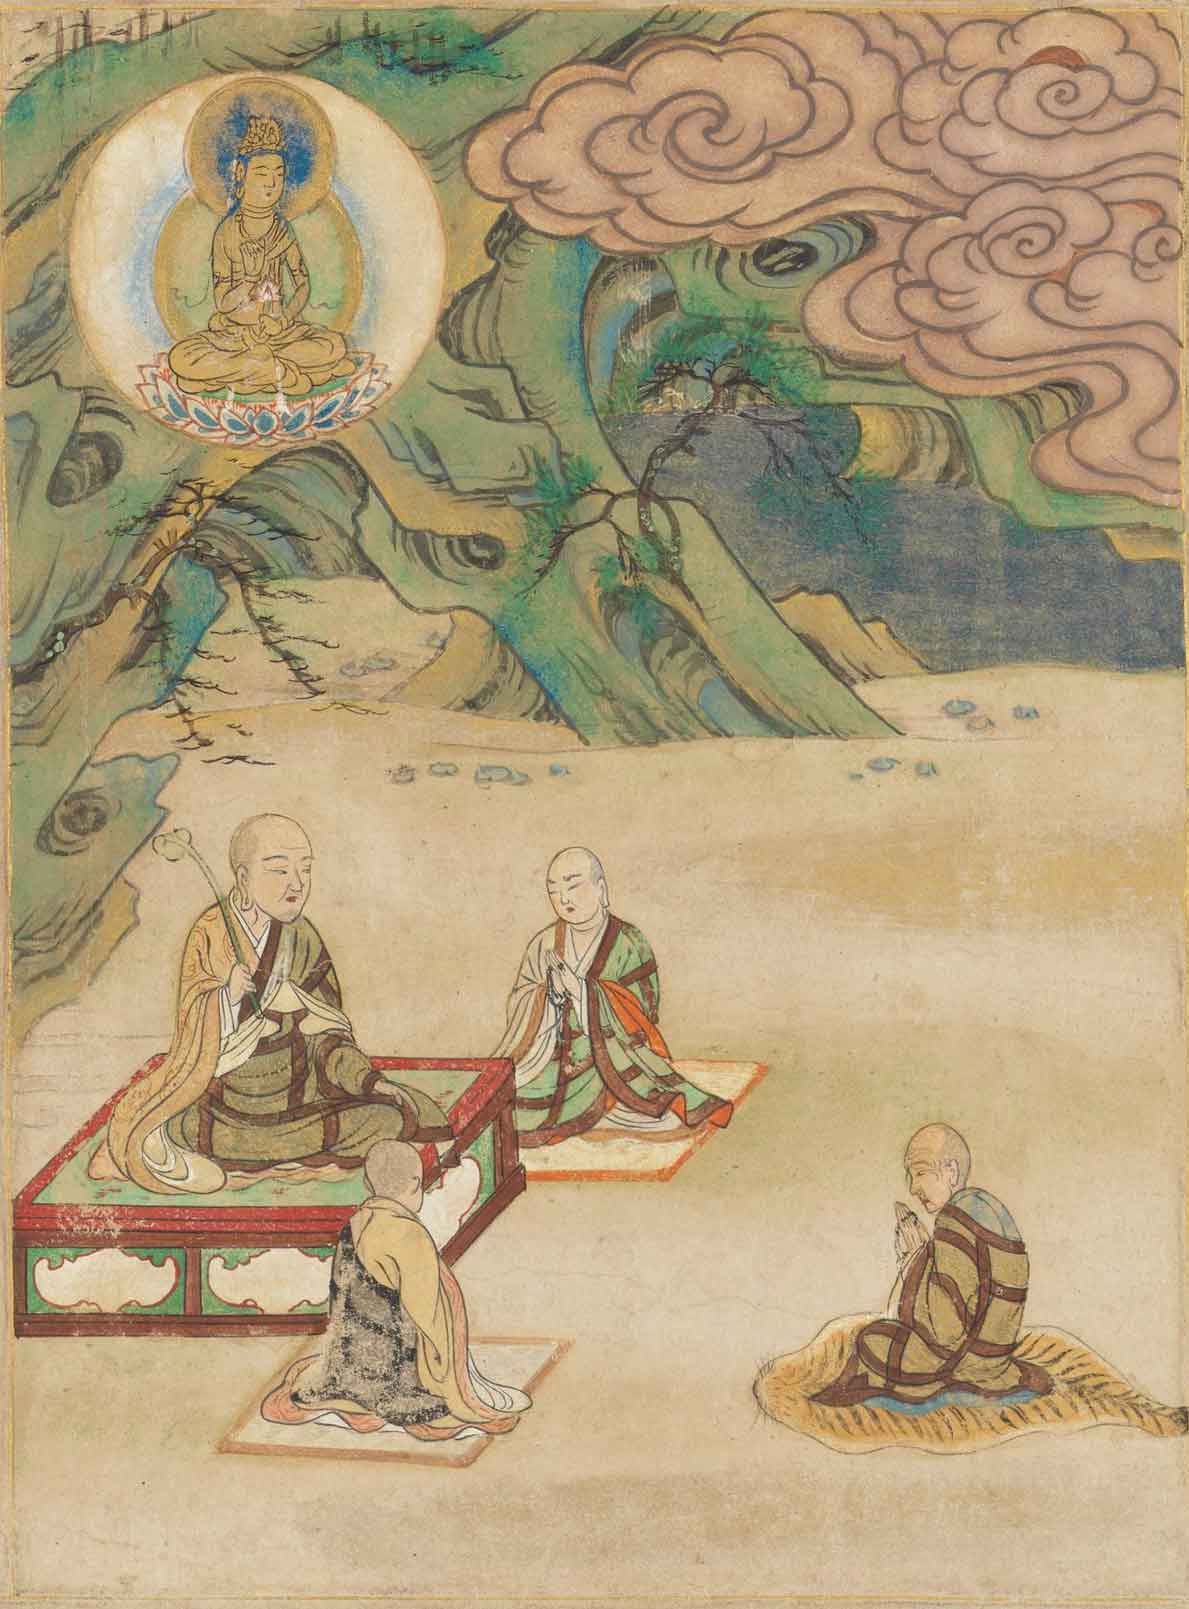 Sugawara Mitsushige (Japanese, active mid-1200s), “Universal Gateway,” Chapter 25 of the Lotus Sutra (detail images), 1257, Kamakura period (1185–1333), Japan, handscroll; ink, color, and gold on paper, 9 11/16 in. x 30 ft. 8 1/16 in. (24.6 x 934.9 cm). The Metropolitan Museum of Art. Purchase, Louisa Eldridge McBurney Gift, 1953, 53.7.3